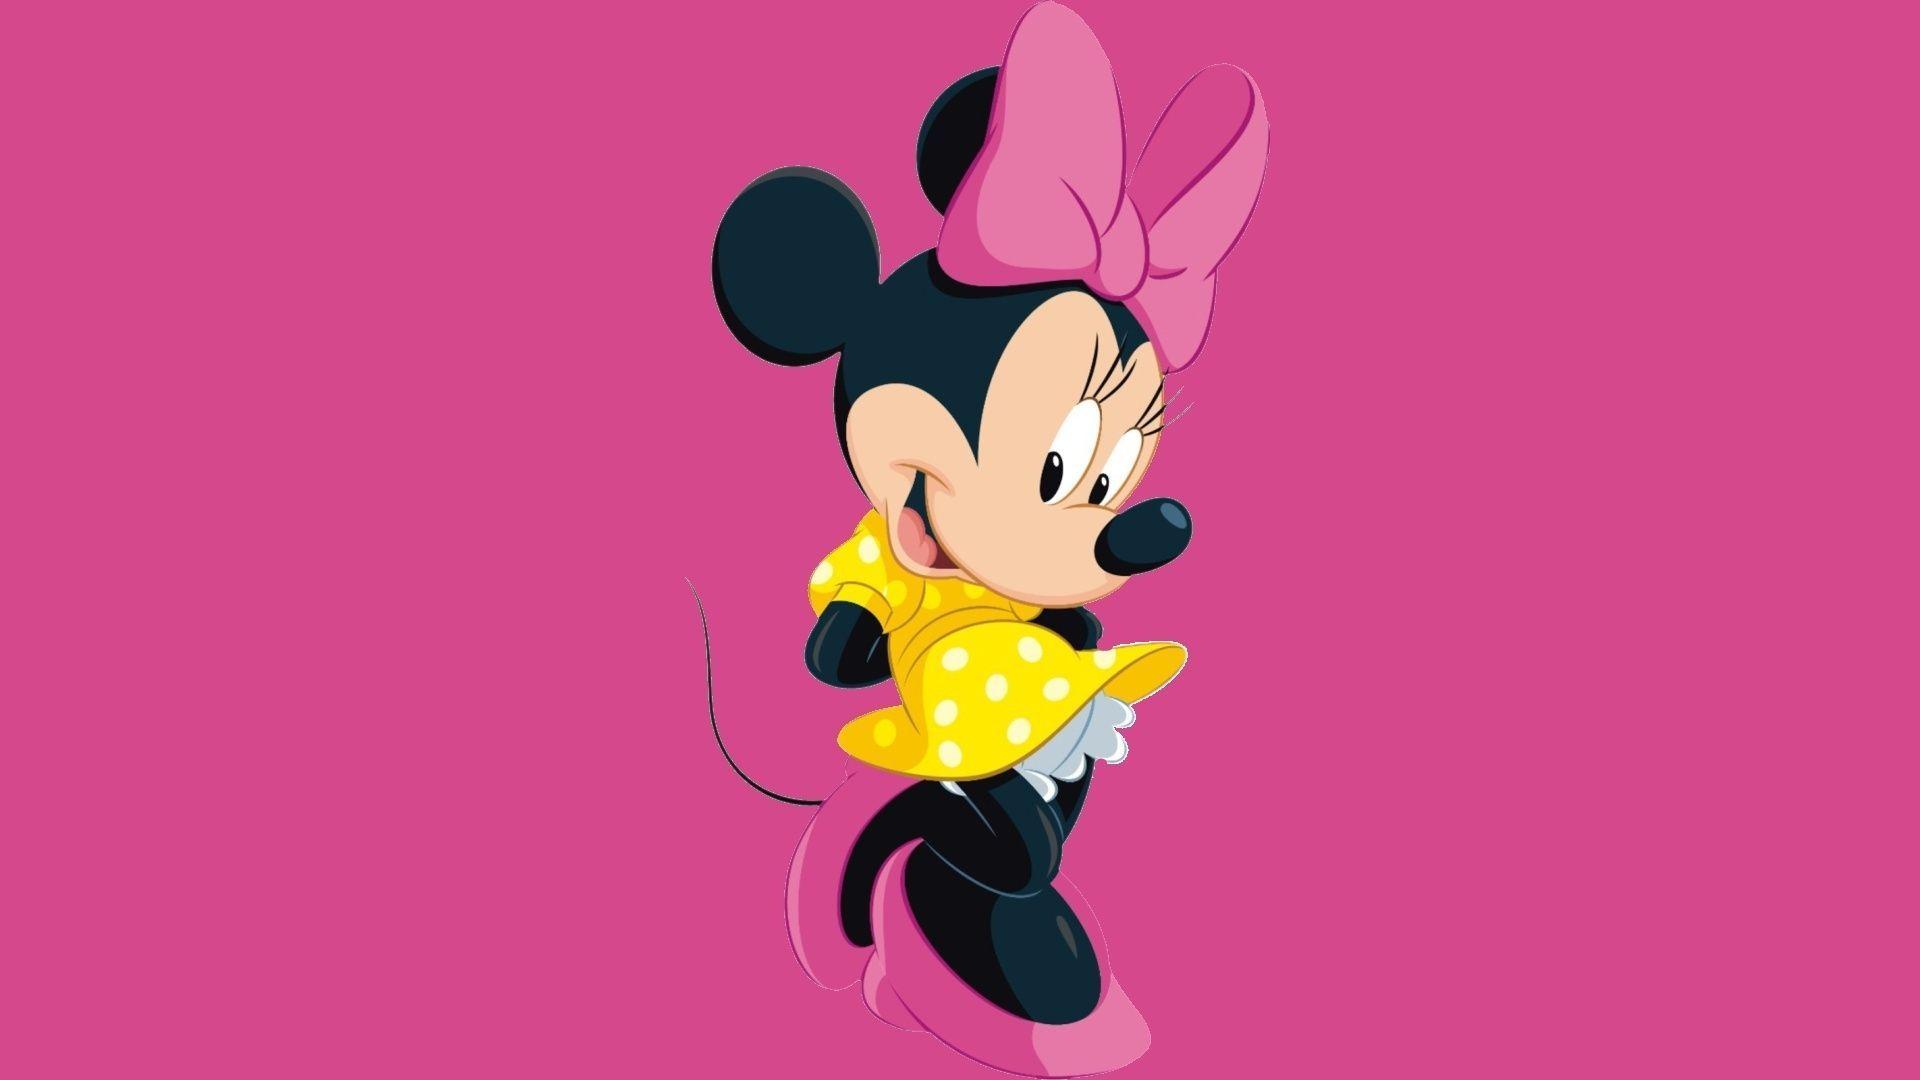 Mickey  Minnie Mouse Kiss Wallpaper For Mobile  Wallpapers13com